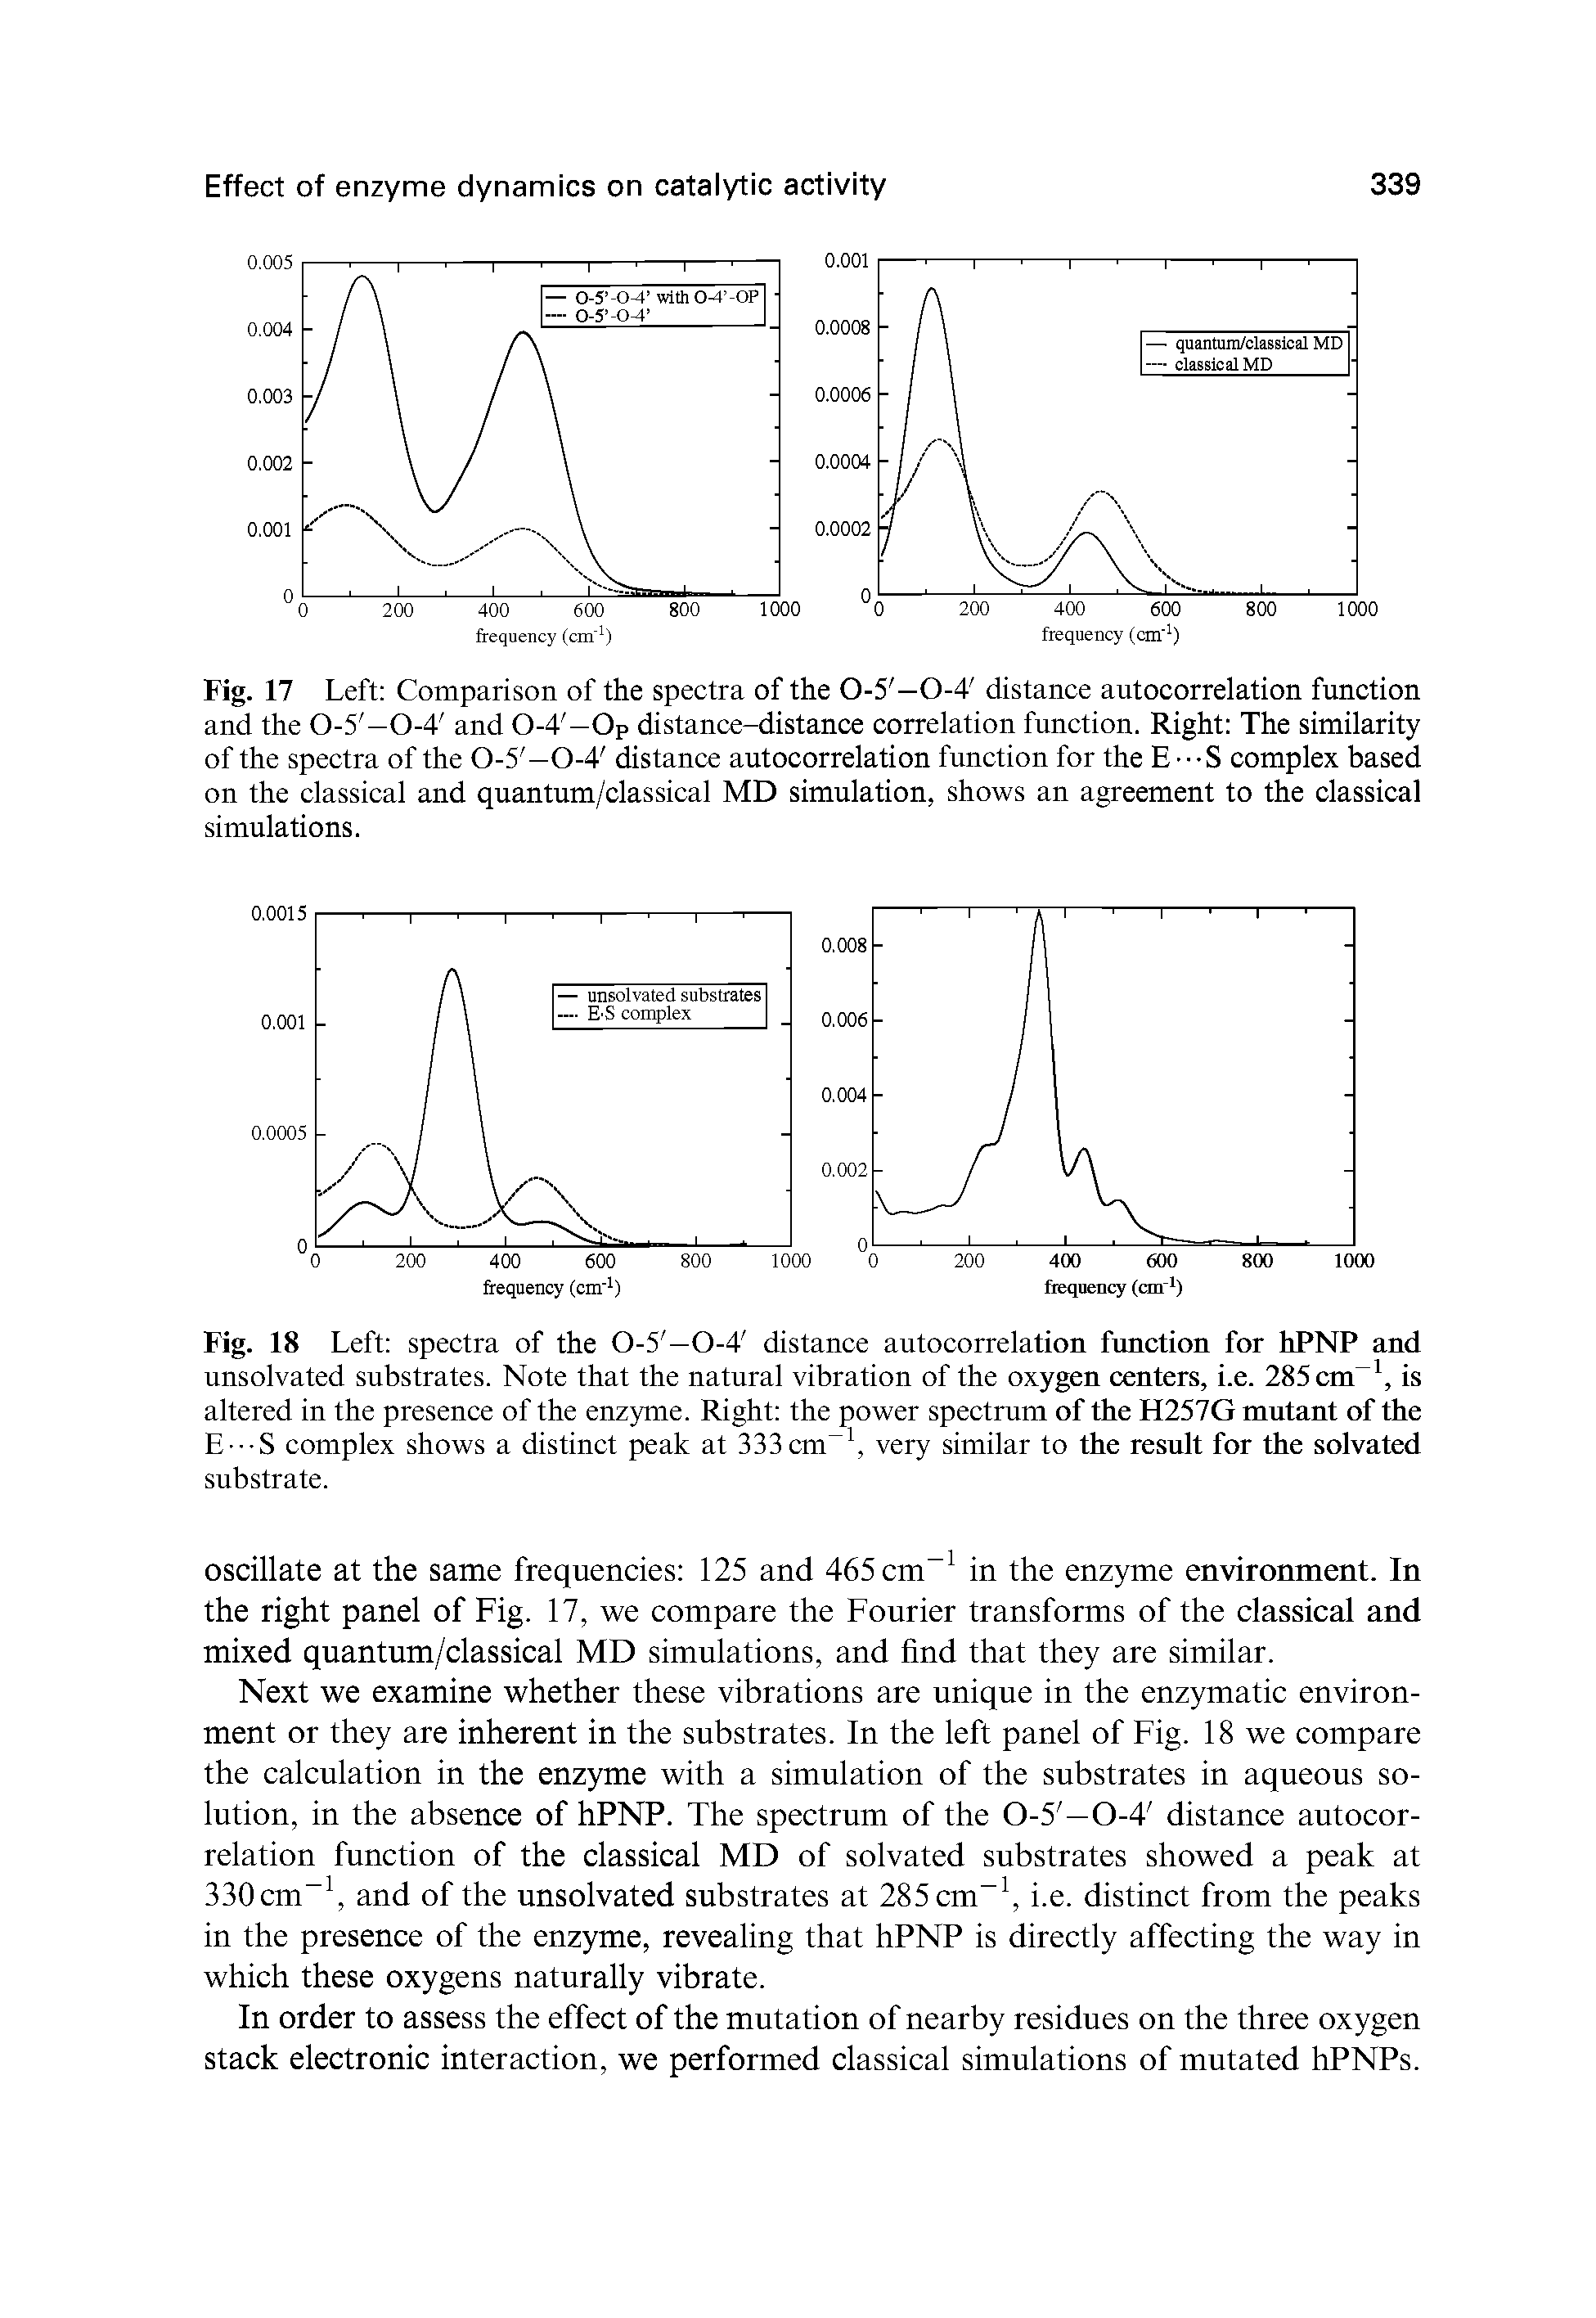 Fig. 17 Left Comparison of the spectra of the 0-5 —0-4 distance autocorrelation function and the 0-5 —0-4 and 0-4 —Op distance-distance correlation function. Right The similarity of the spectra of the 0-5 —0-4 distance autocorrelation function for the E---S complex based on the classical and quantum/classical MD simulation, shows an agreement to the classical simulations.